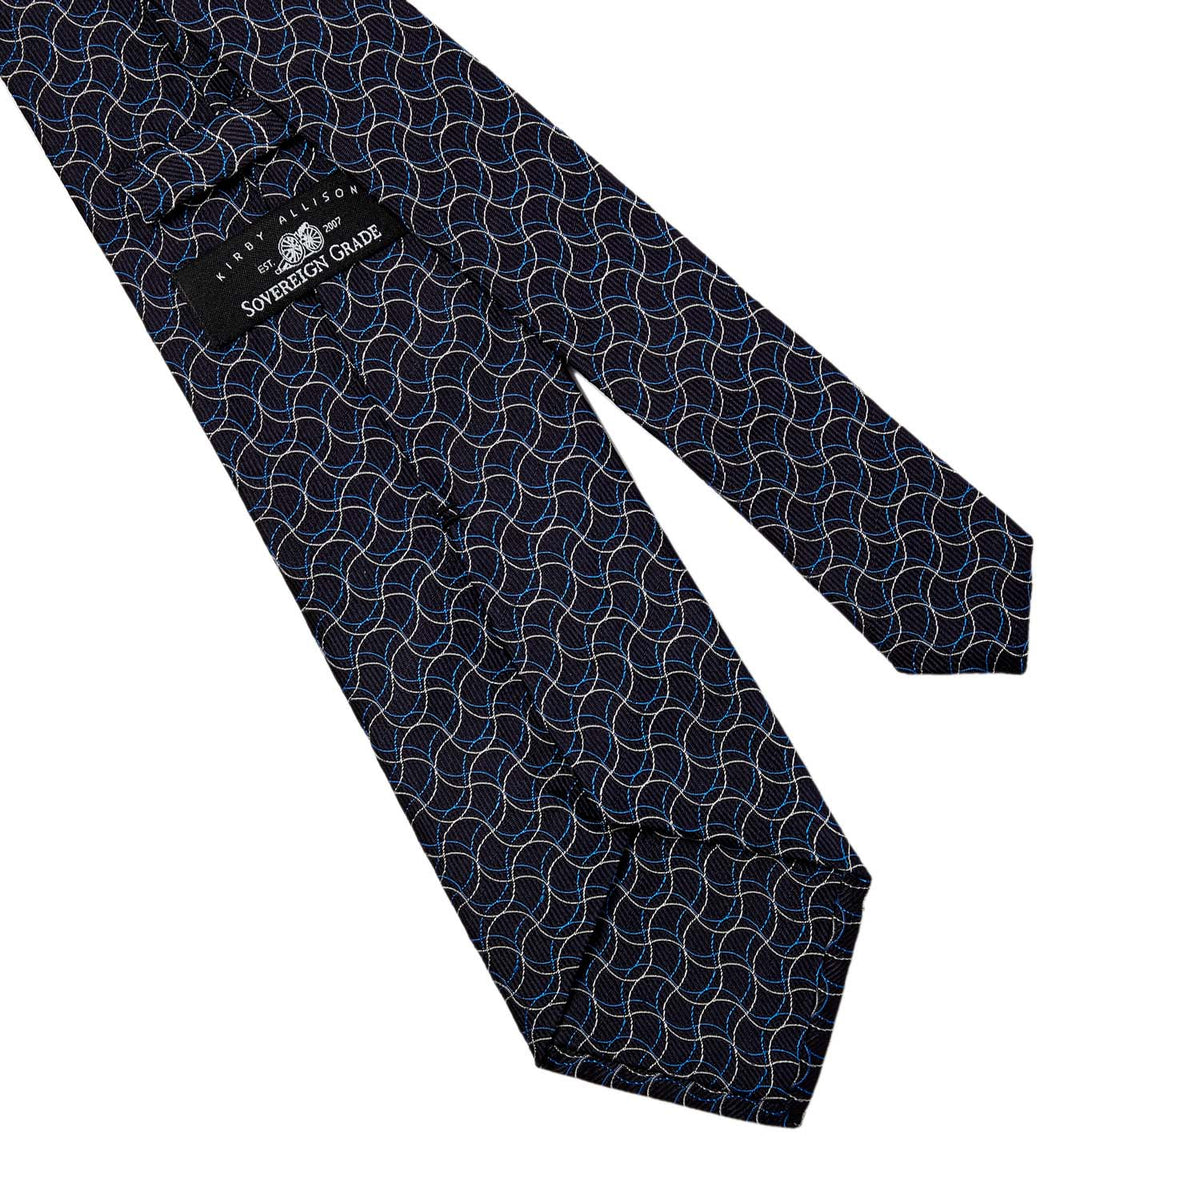 A Sovereign Grade Navy Swirl Jacquard Tie from KirbyAllison.com, handmade with a blue and black geometric pattern, from the United Kingdom.